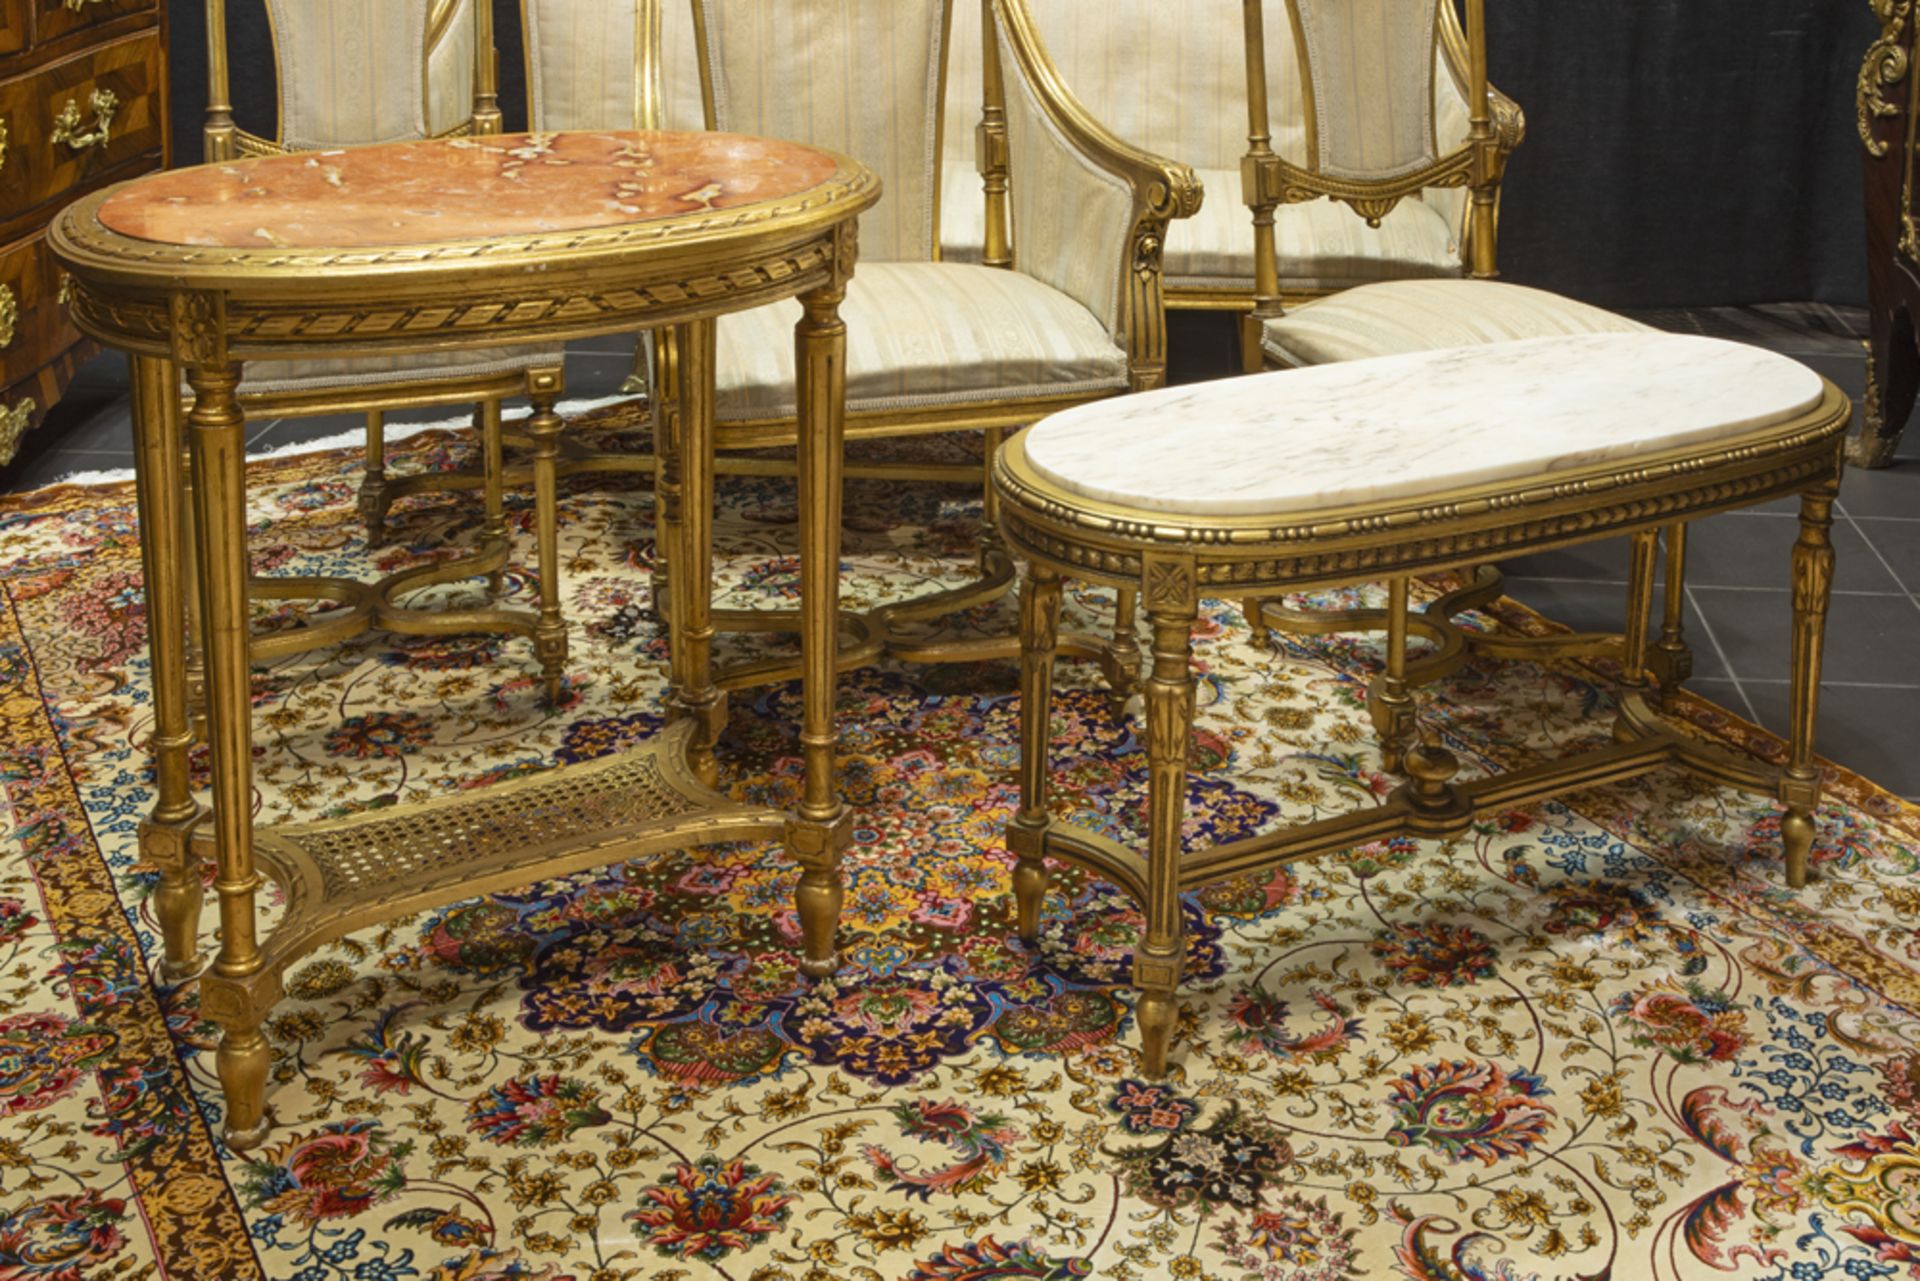 6pc neoclassical salon suite in sculpted and gilded wood with a Louis XVI design and ornamentation : - Image 2 of 4